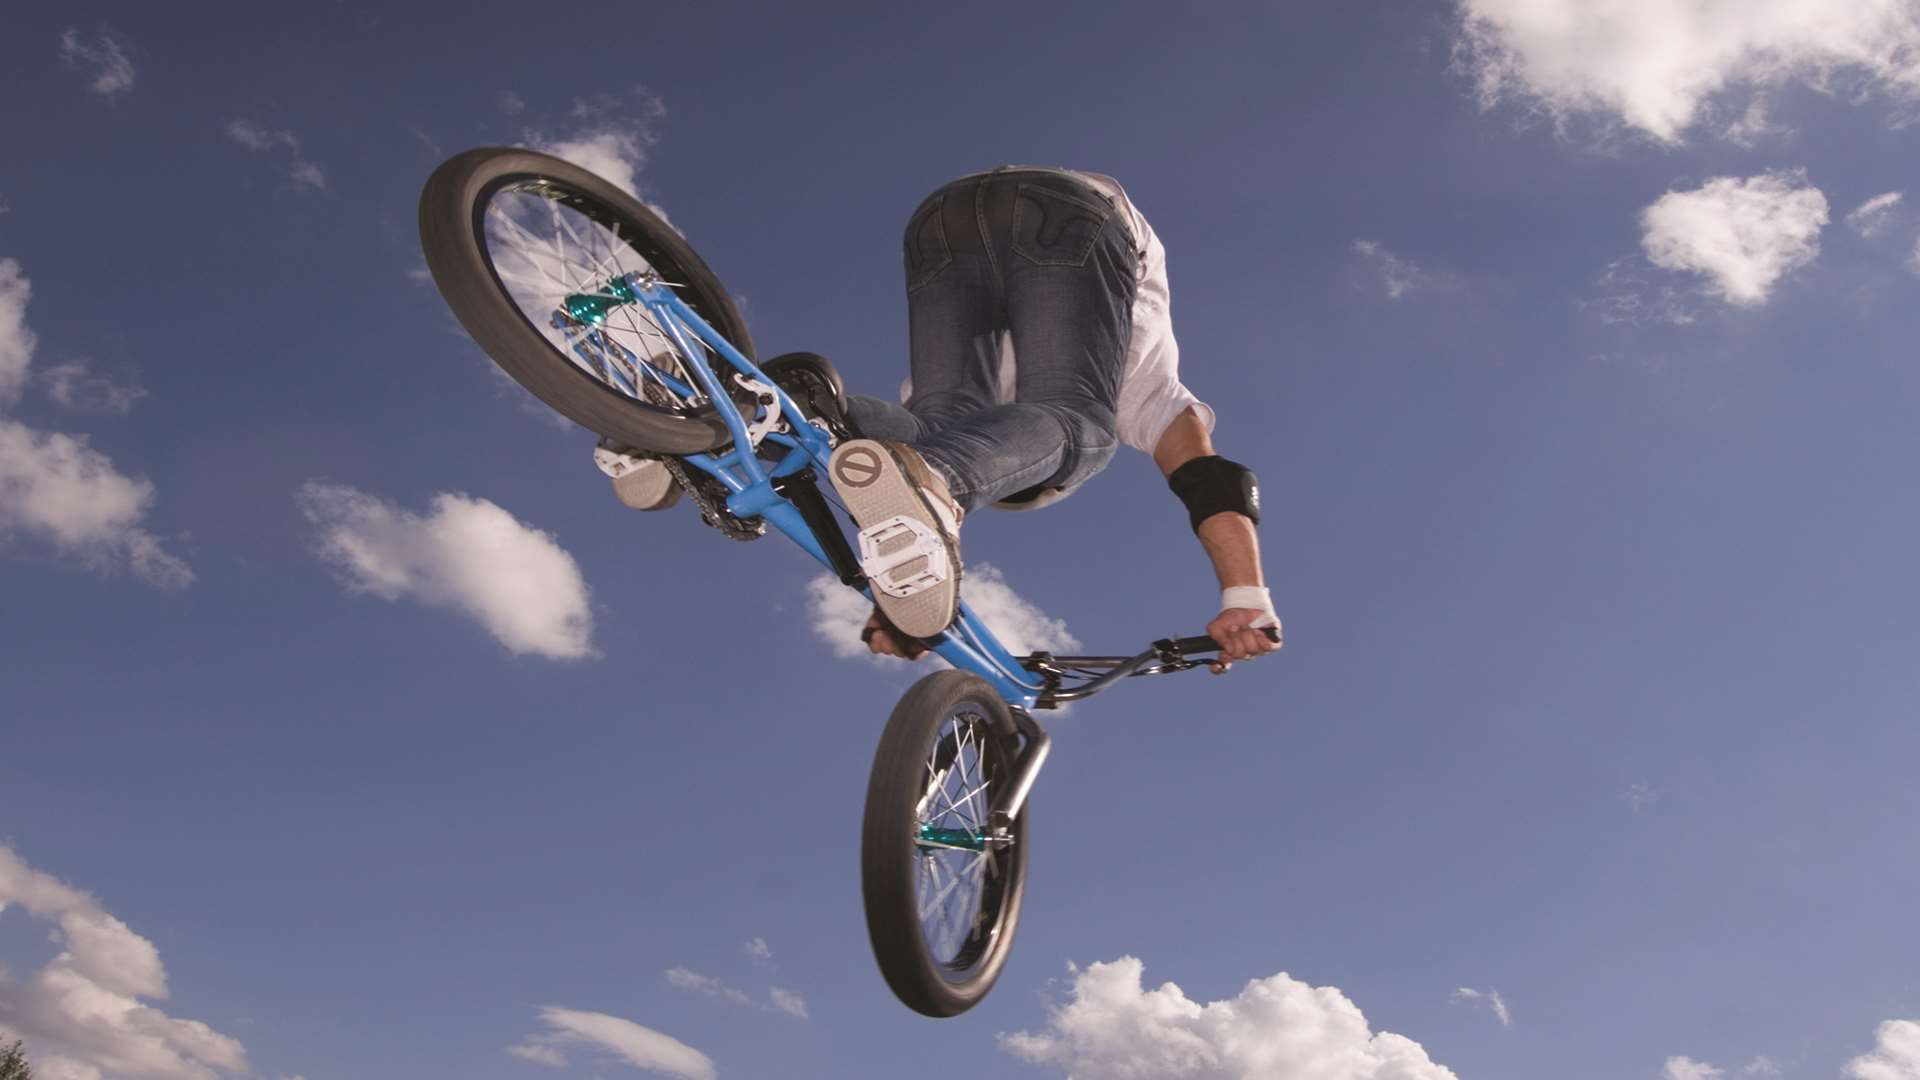 The youngsters have been pulling dangerous stunts on their bikes. Stock image